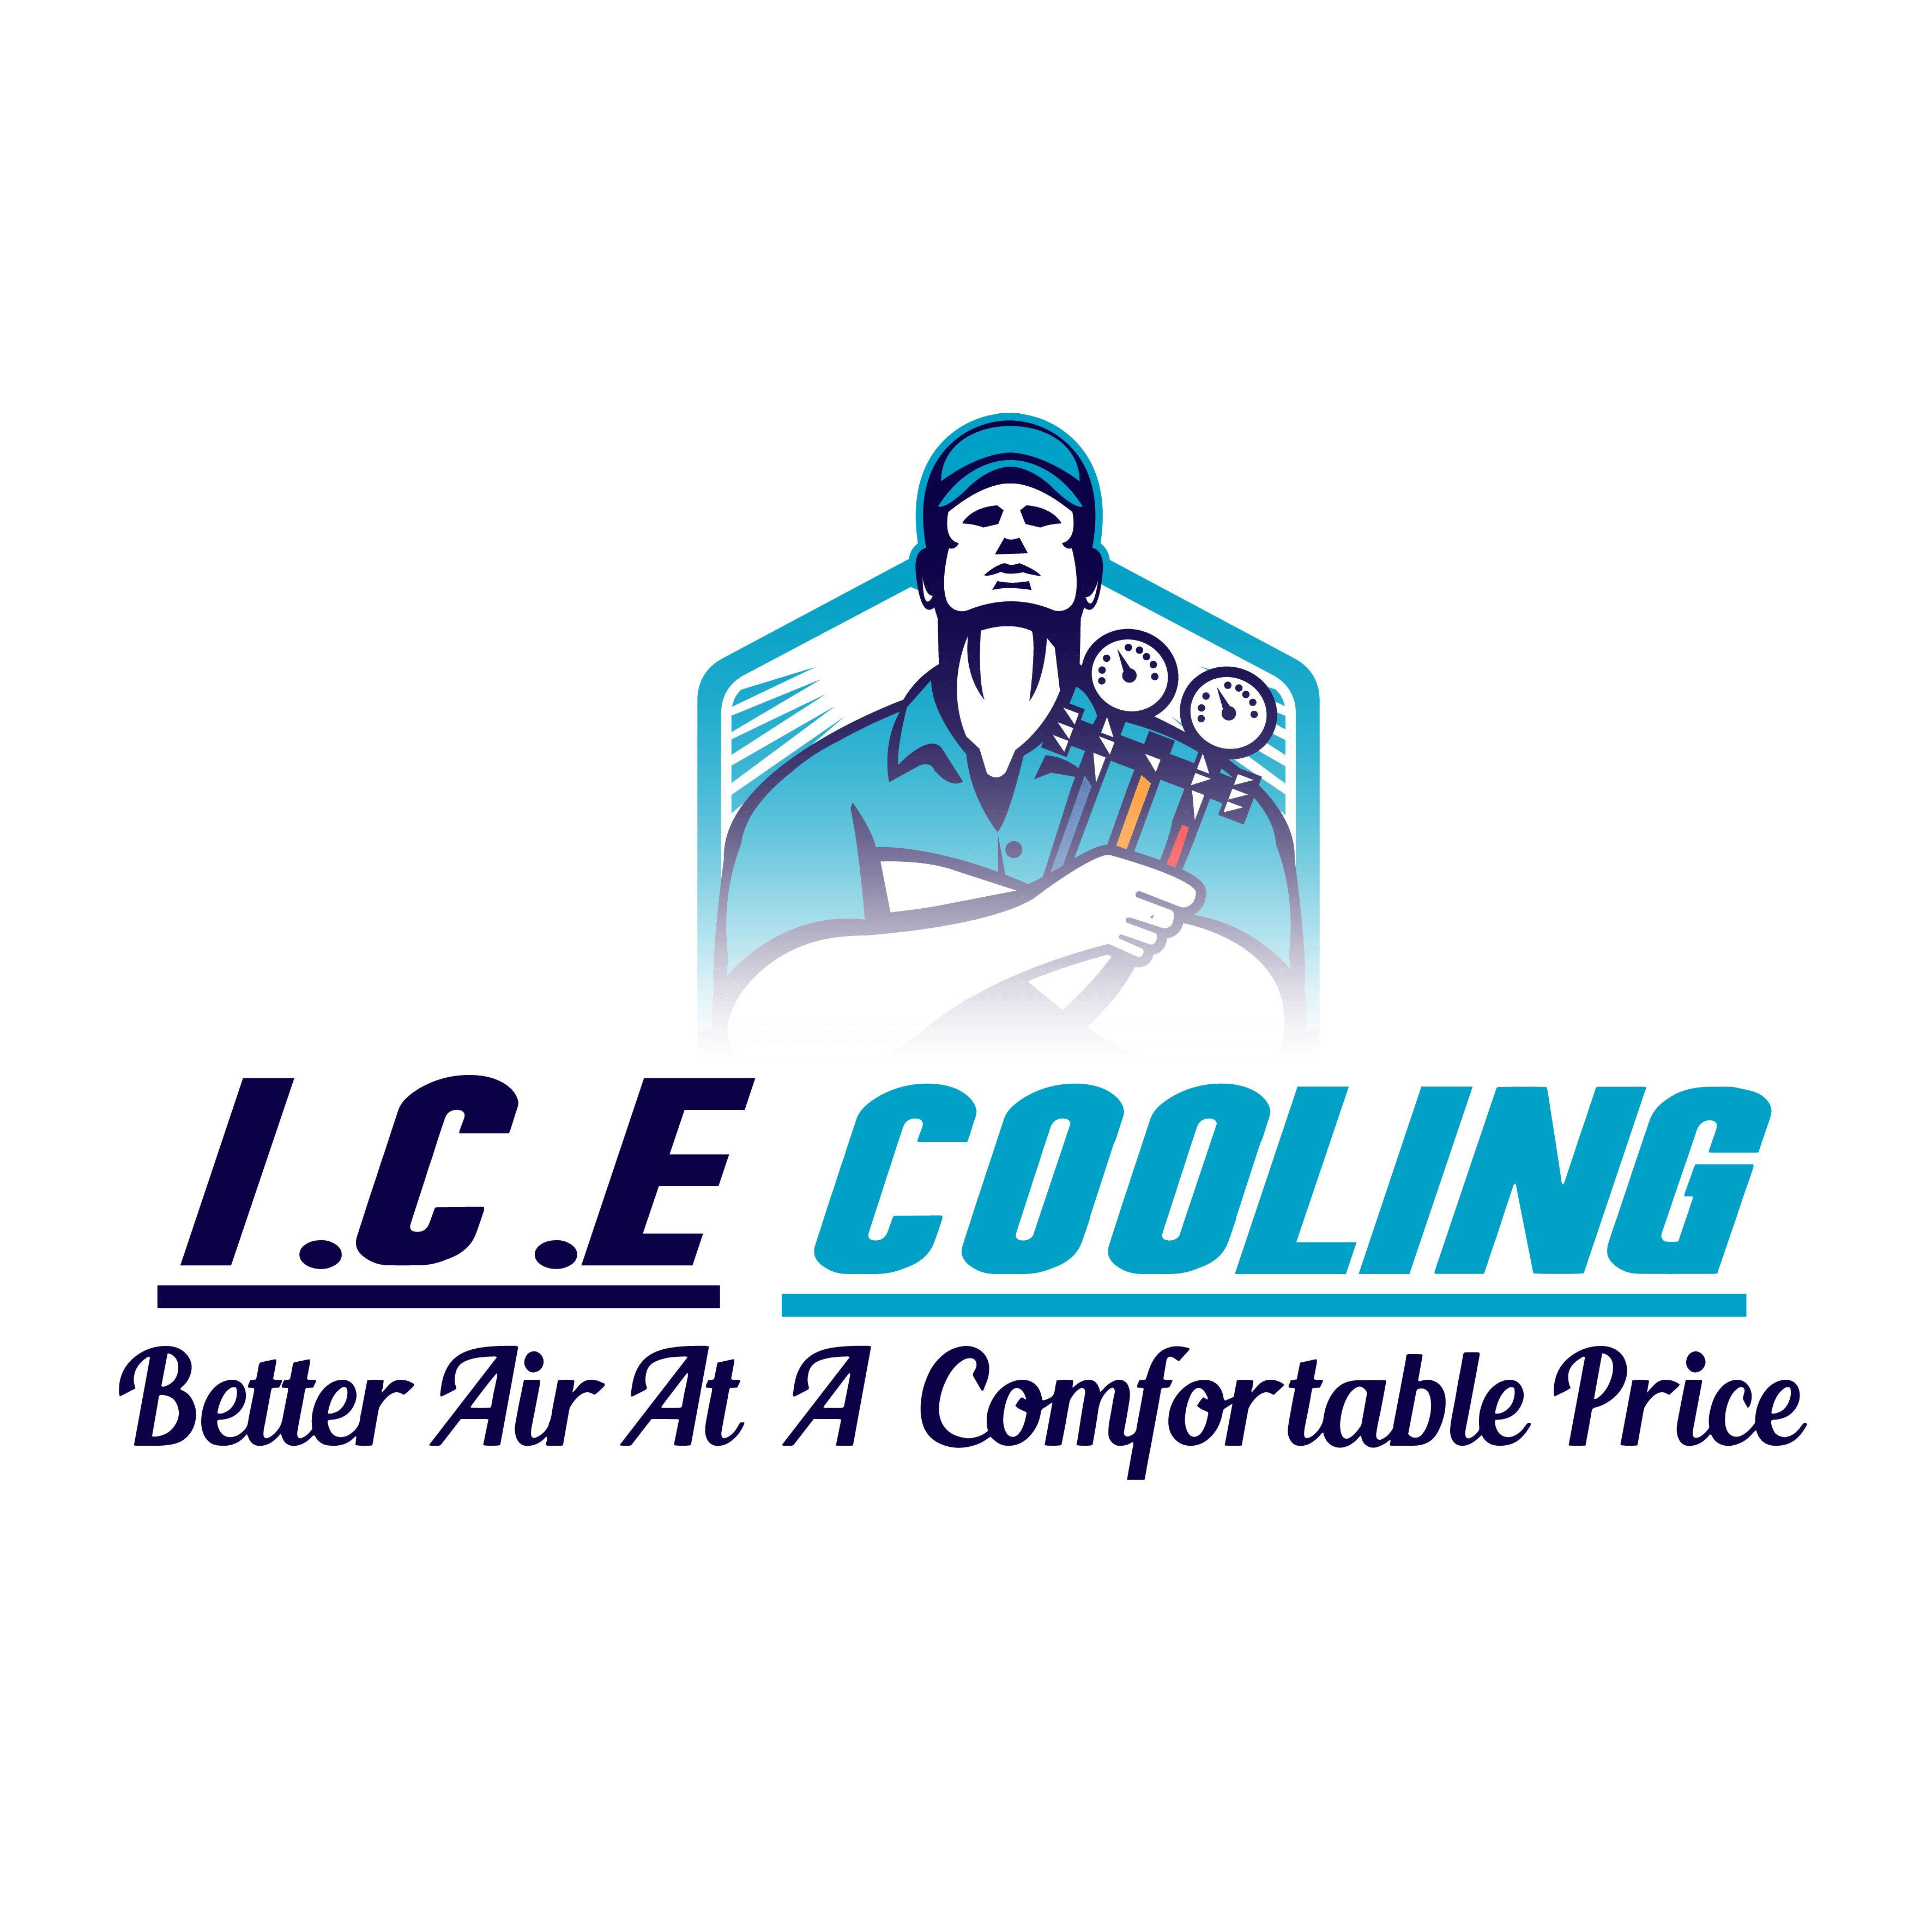 I.C.E. Cooling and Heating Is Bringing Affordable HVAC Systems to The Doorsteps of Homeowners in Florida Through the State’s Pace Financing Program